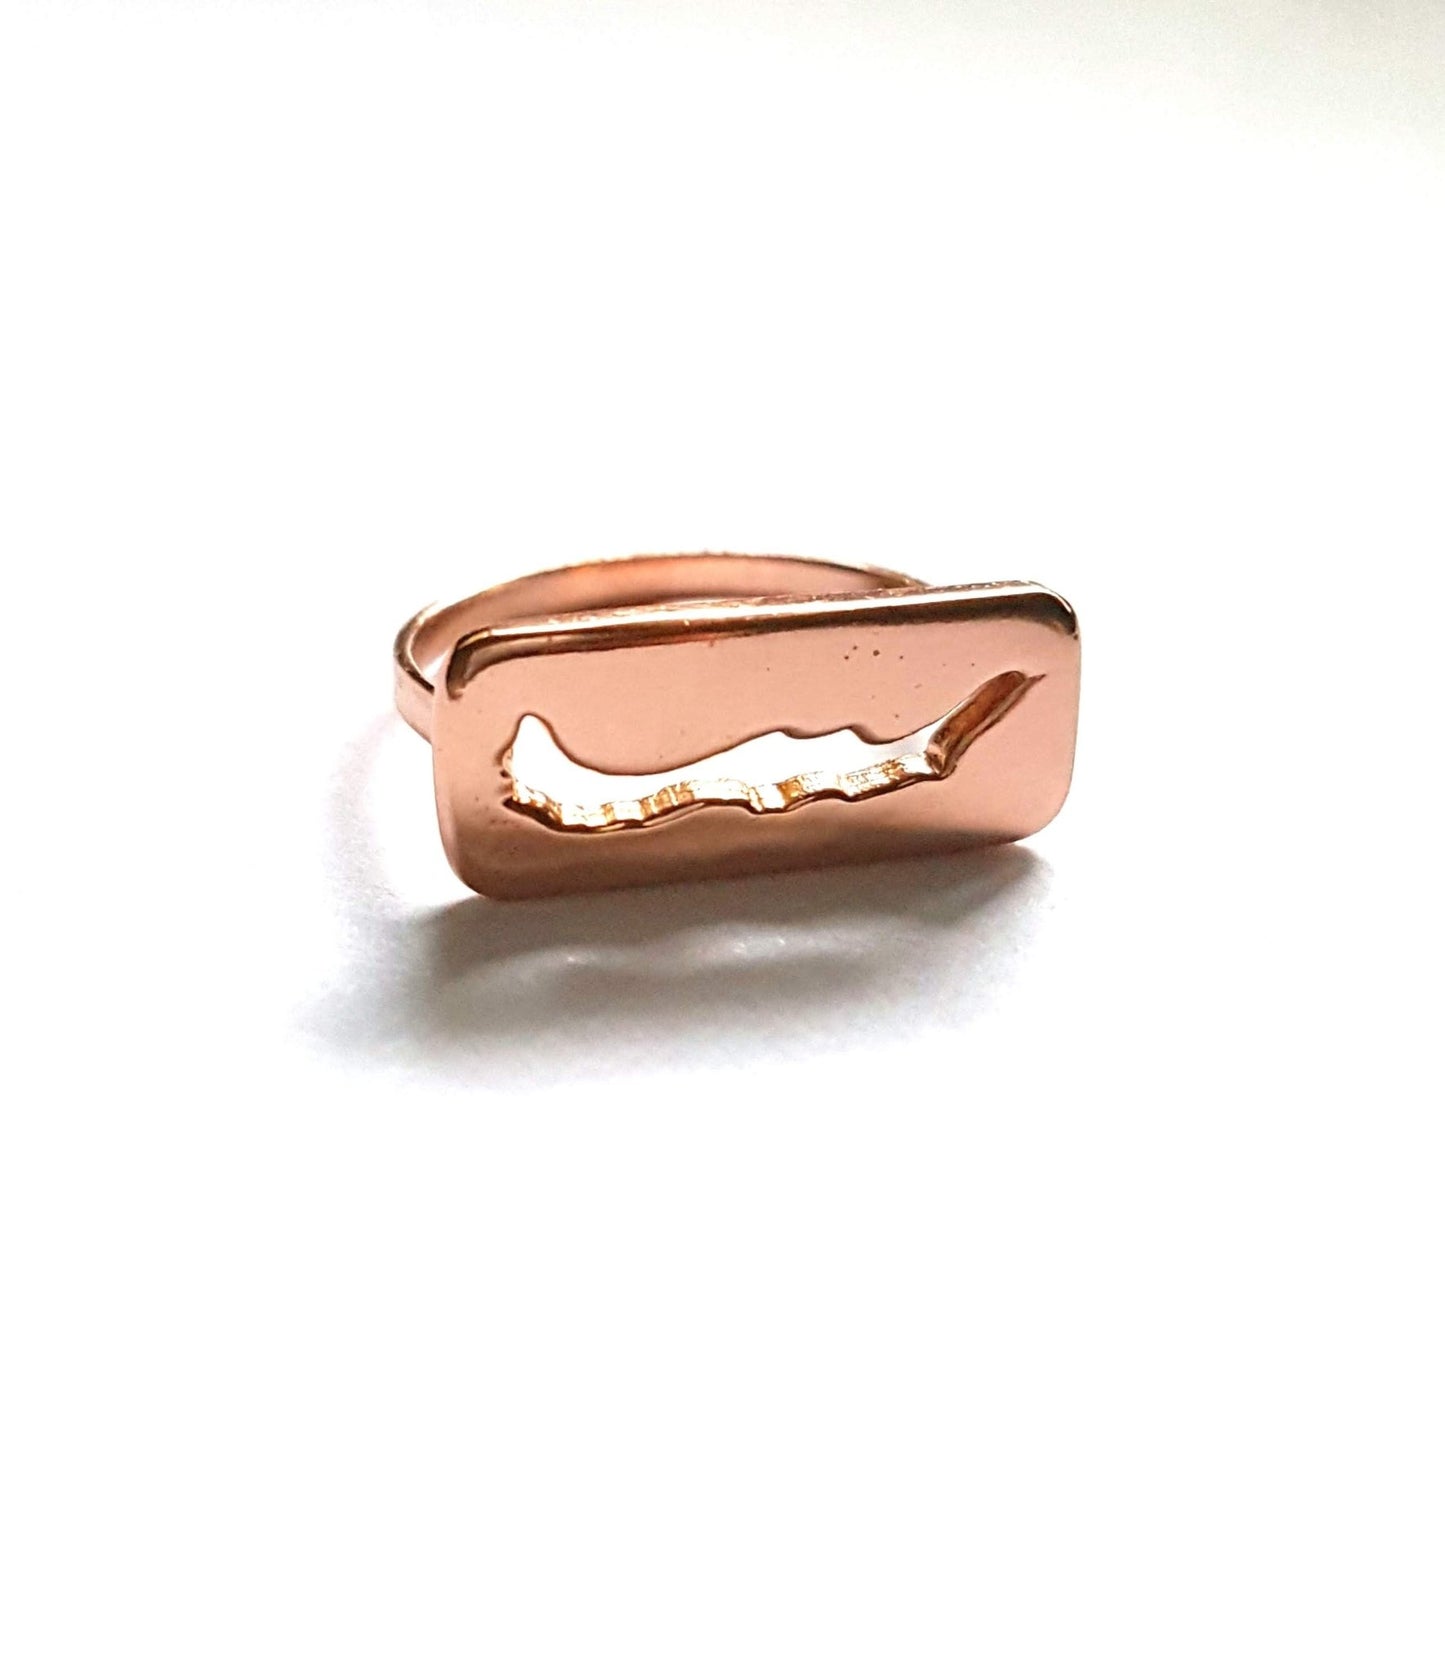 Island-inspired jewelry: Savary Island Cut Out Ring in rose gold plated silver